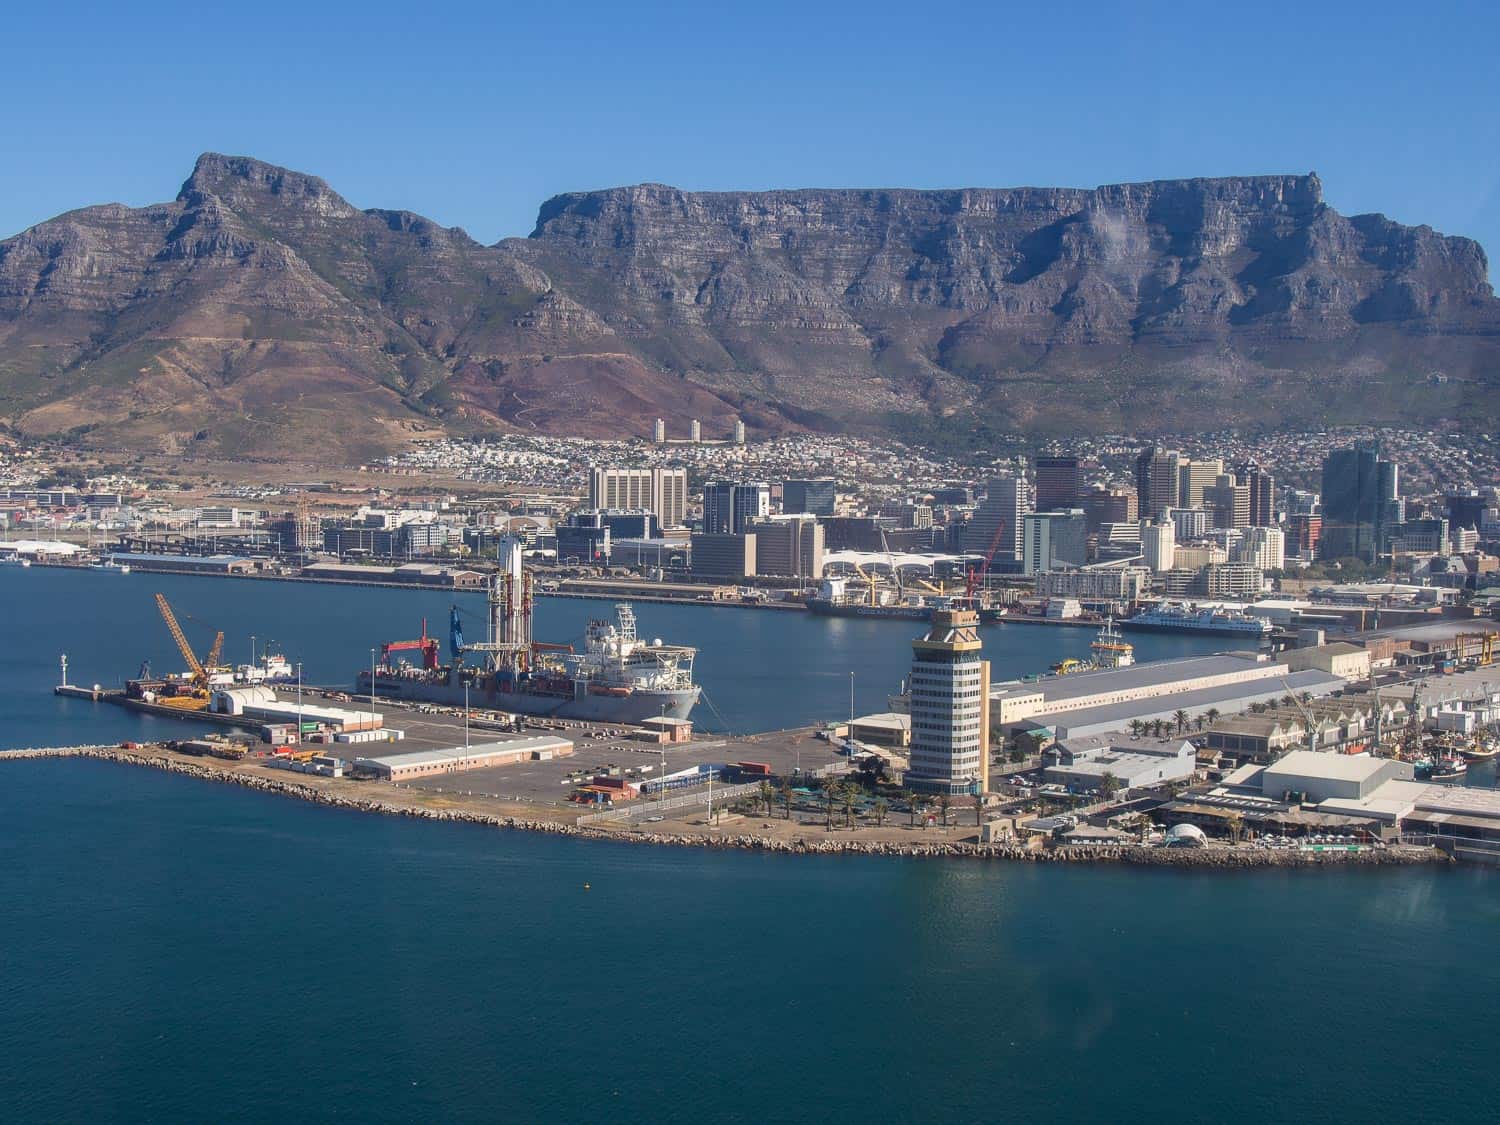 Cape Town Helicopters review: V&A Waterfront